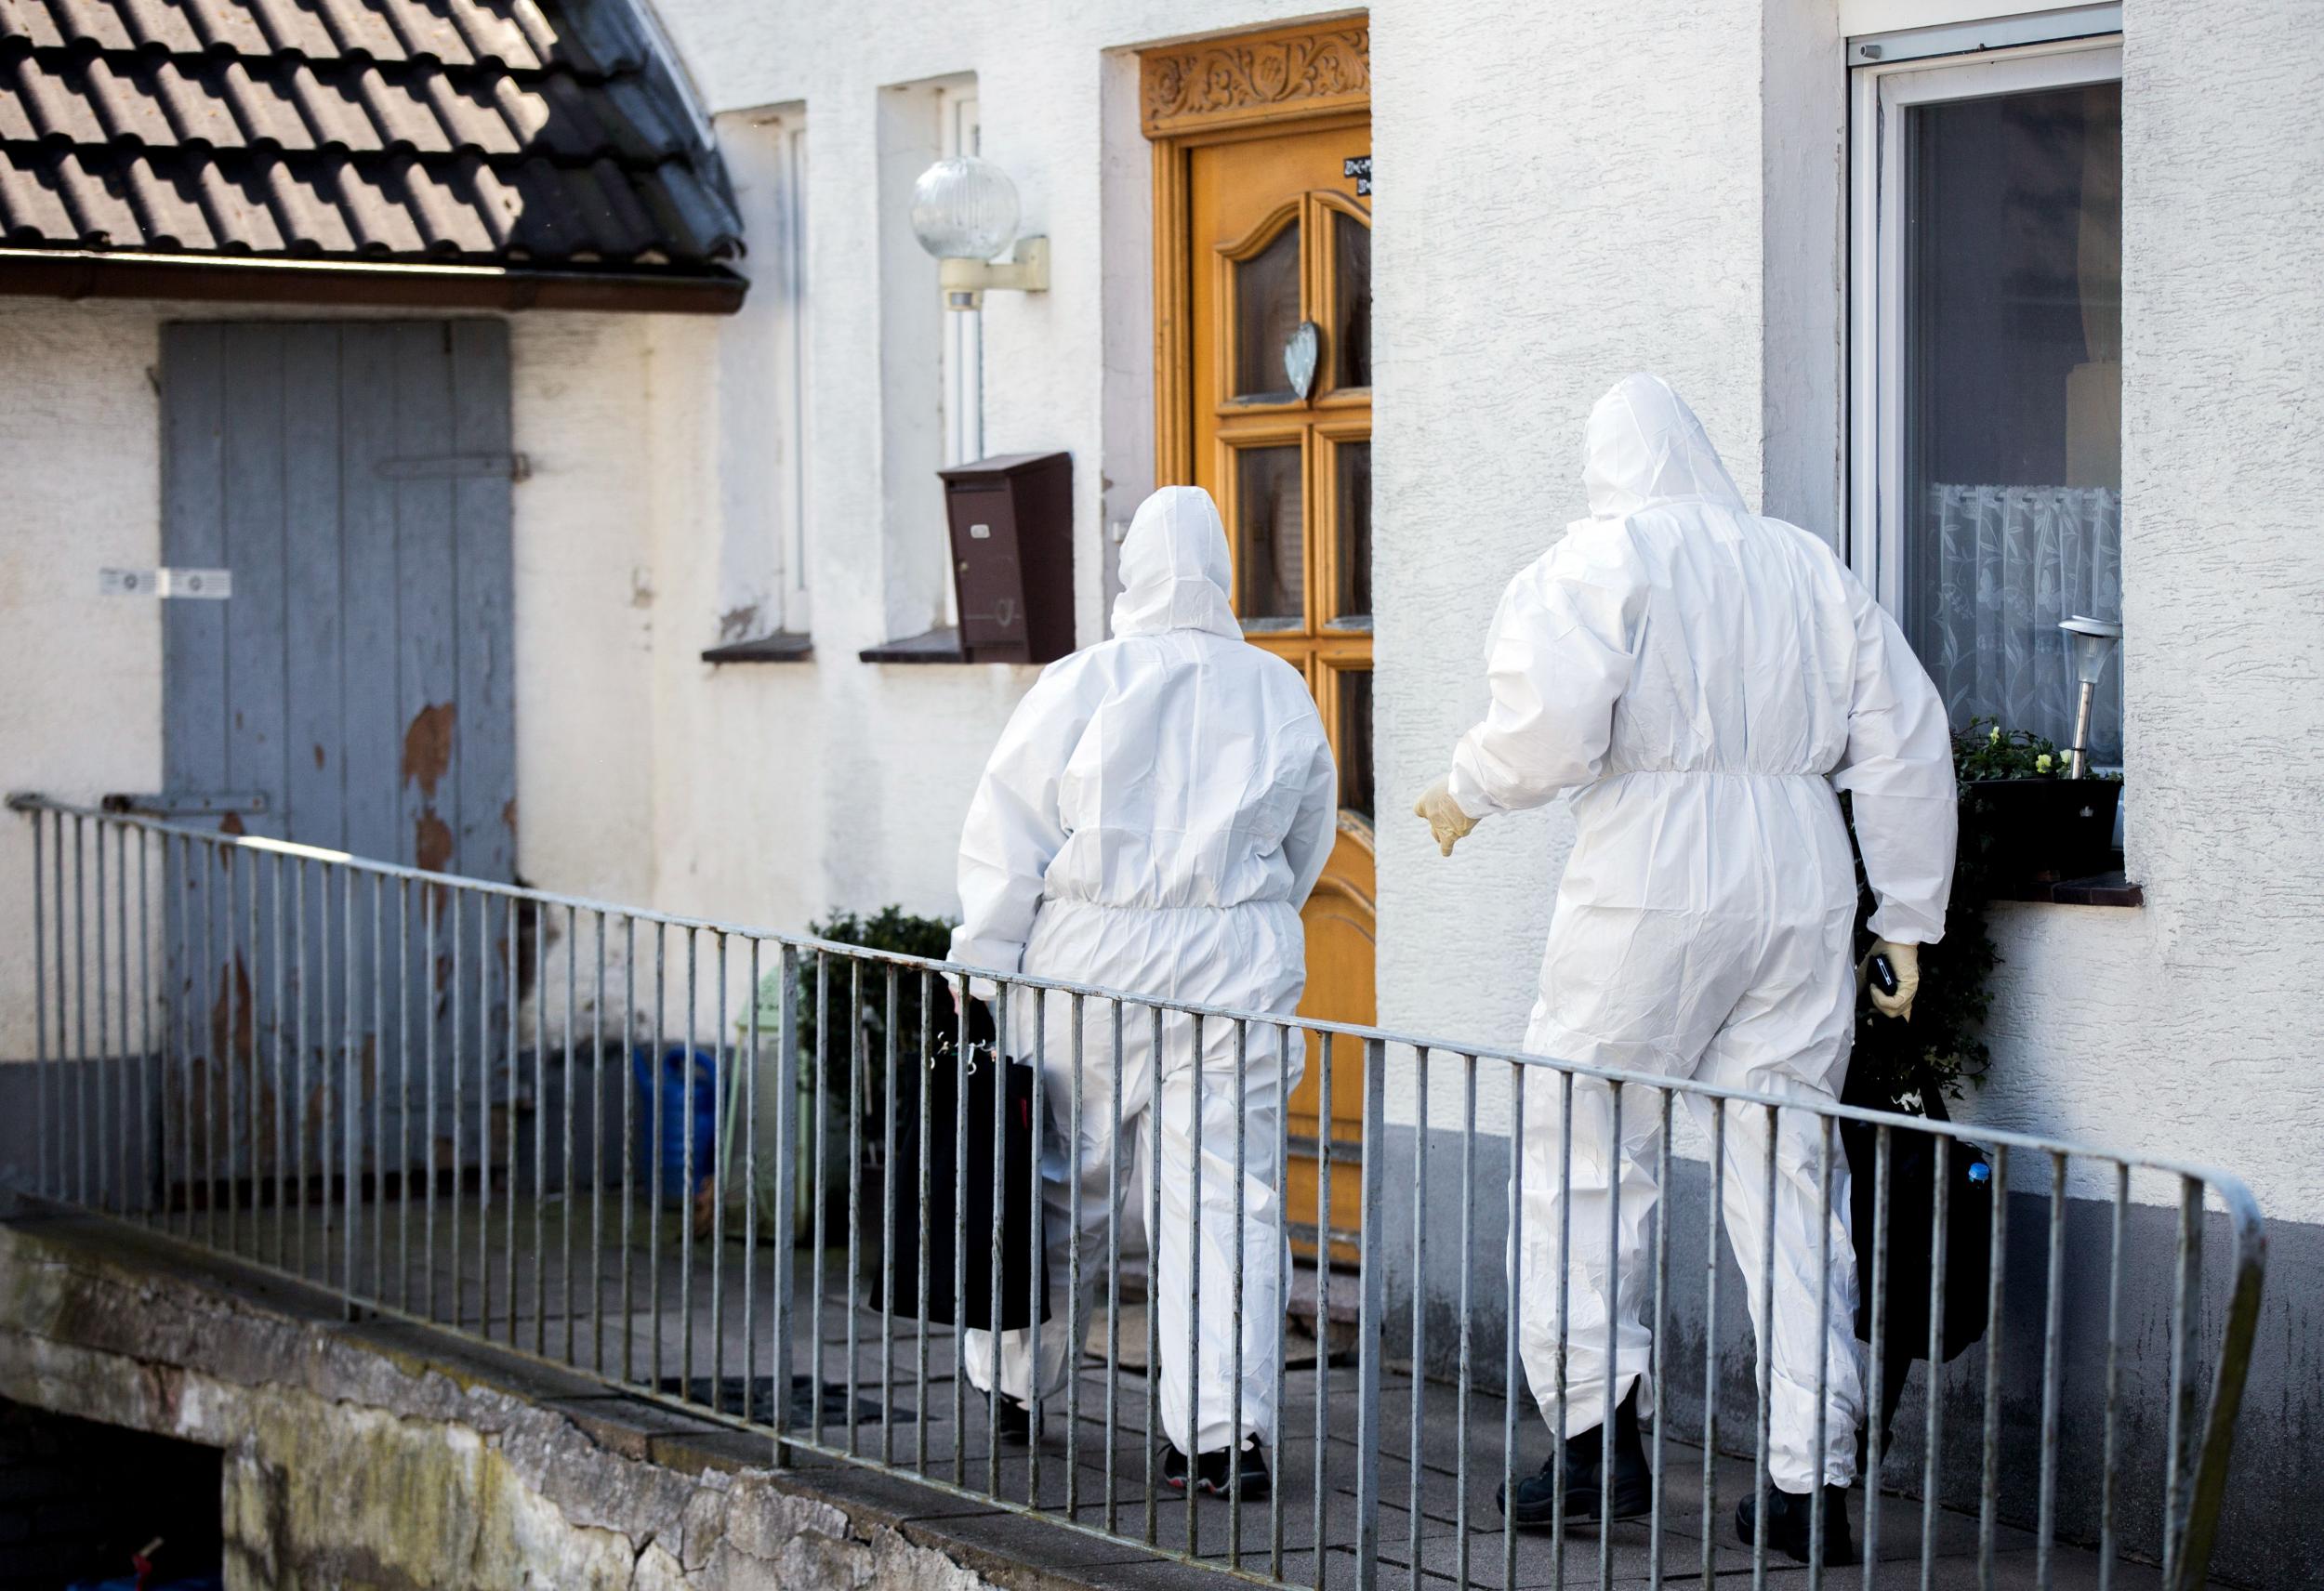 Forensic experts arriving to secure evidences at the house in Hoexter, north west Germany